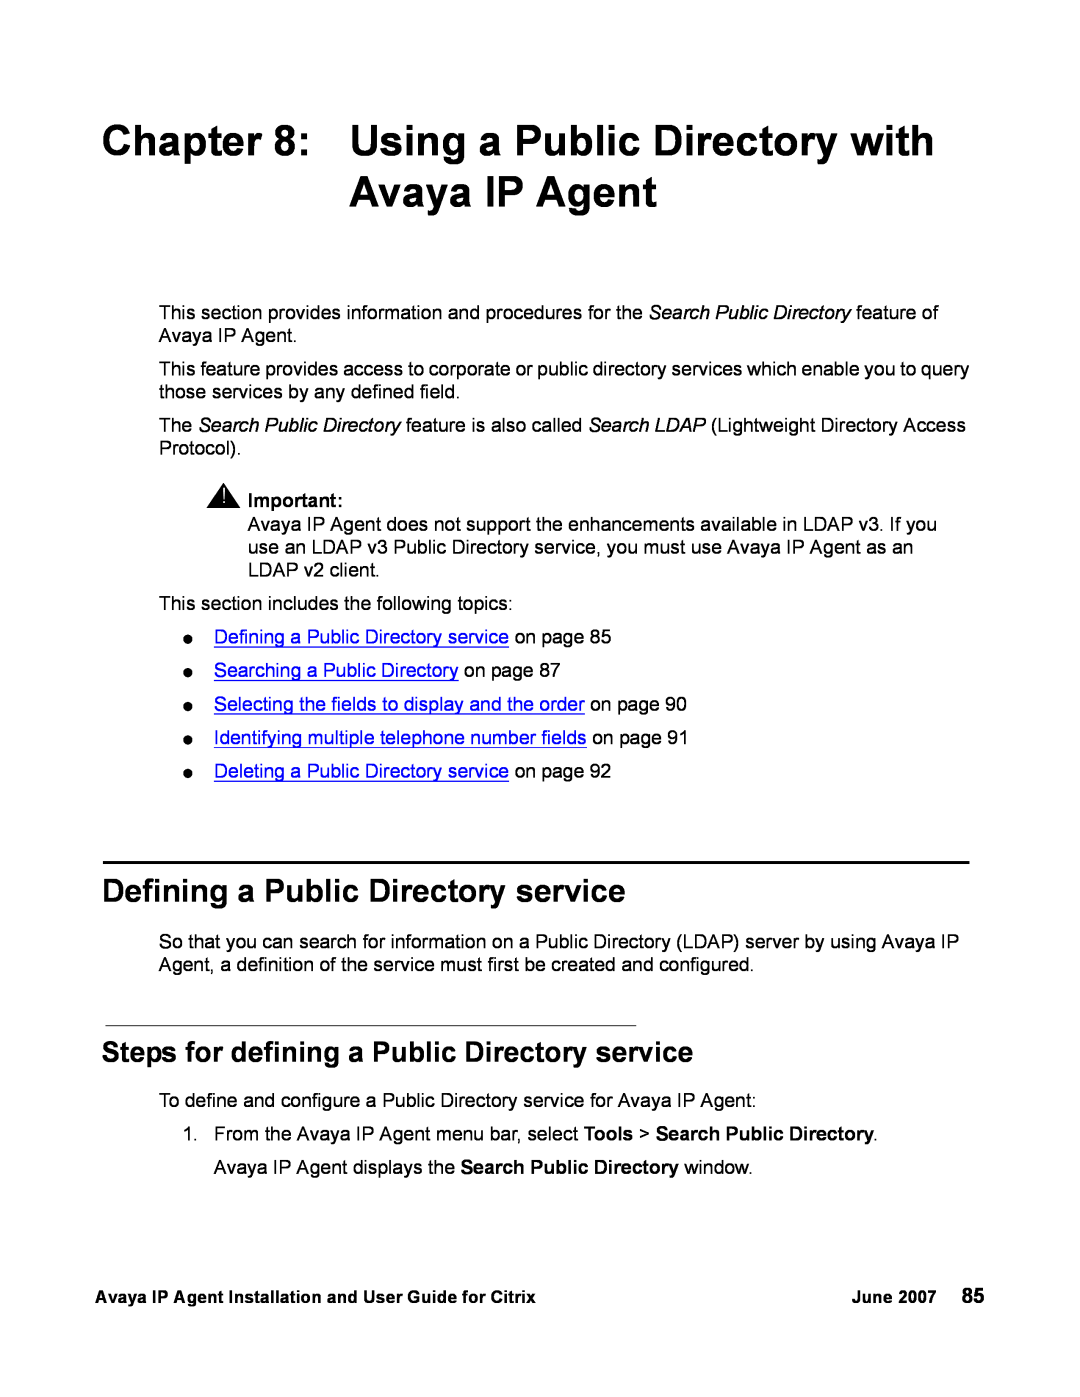 Avaya 7 manual Using a Public Directory with Avaya IP Agent, Defining a Public Directory service 